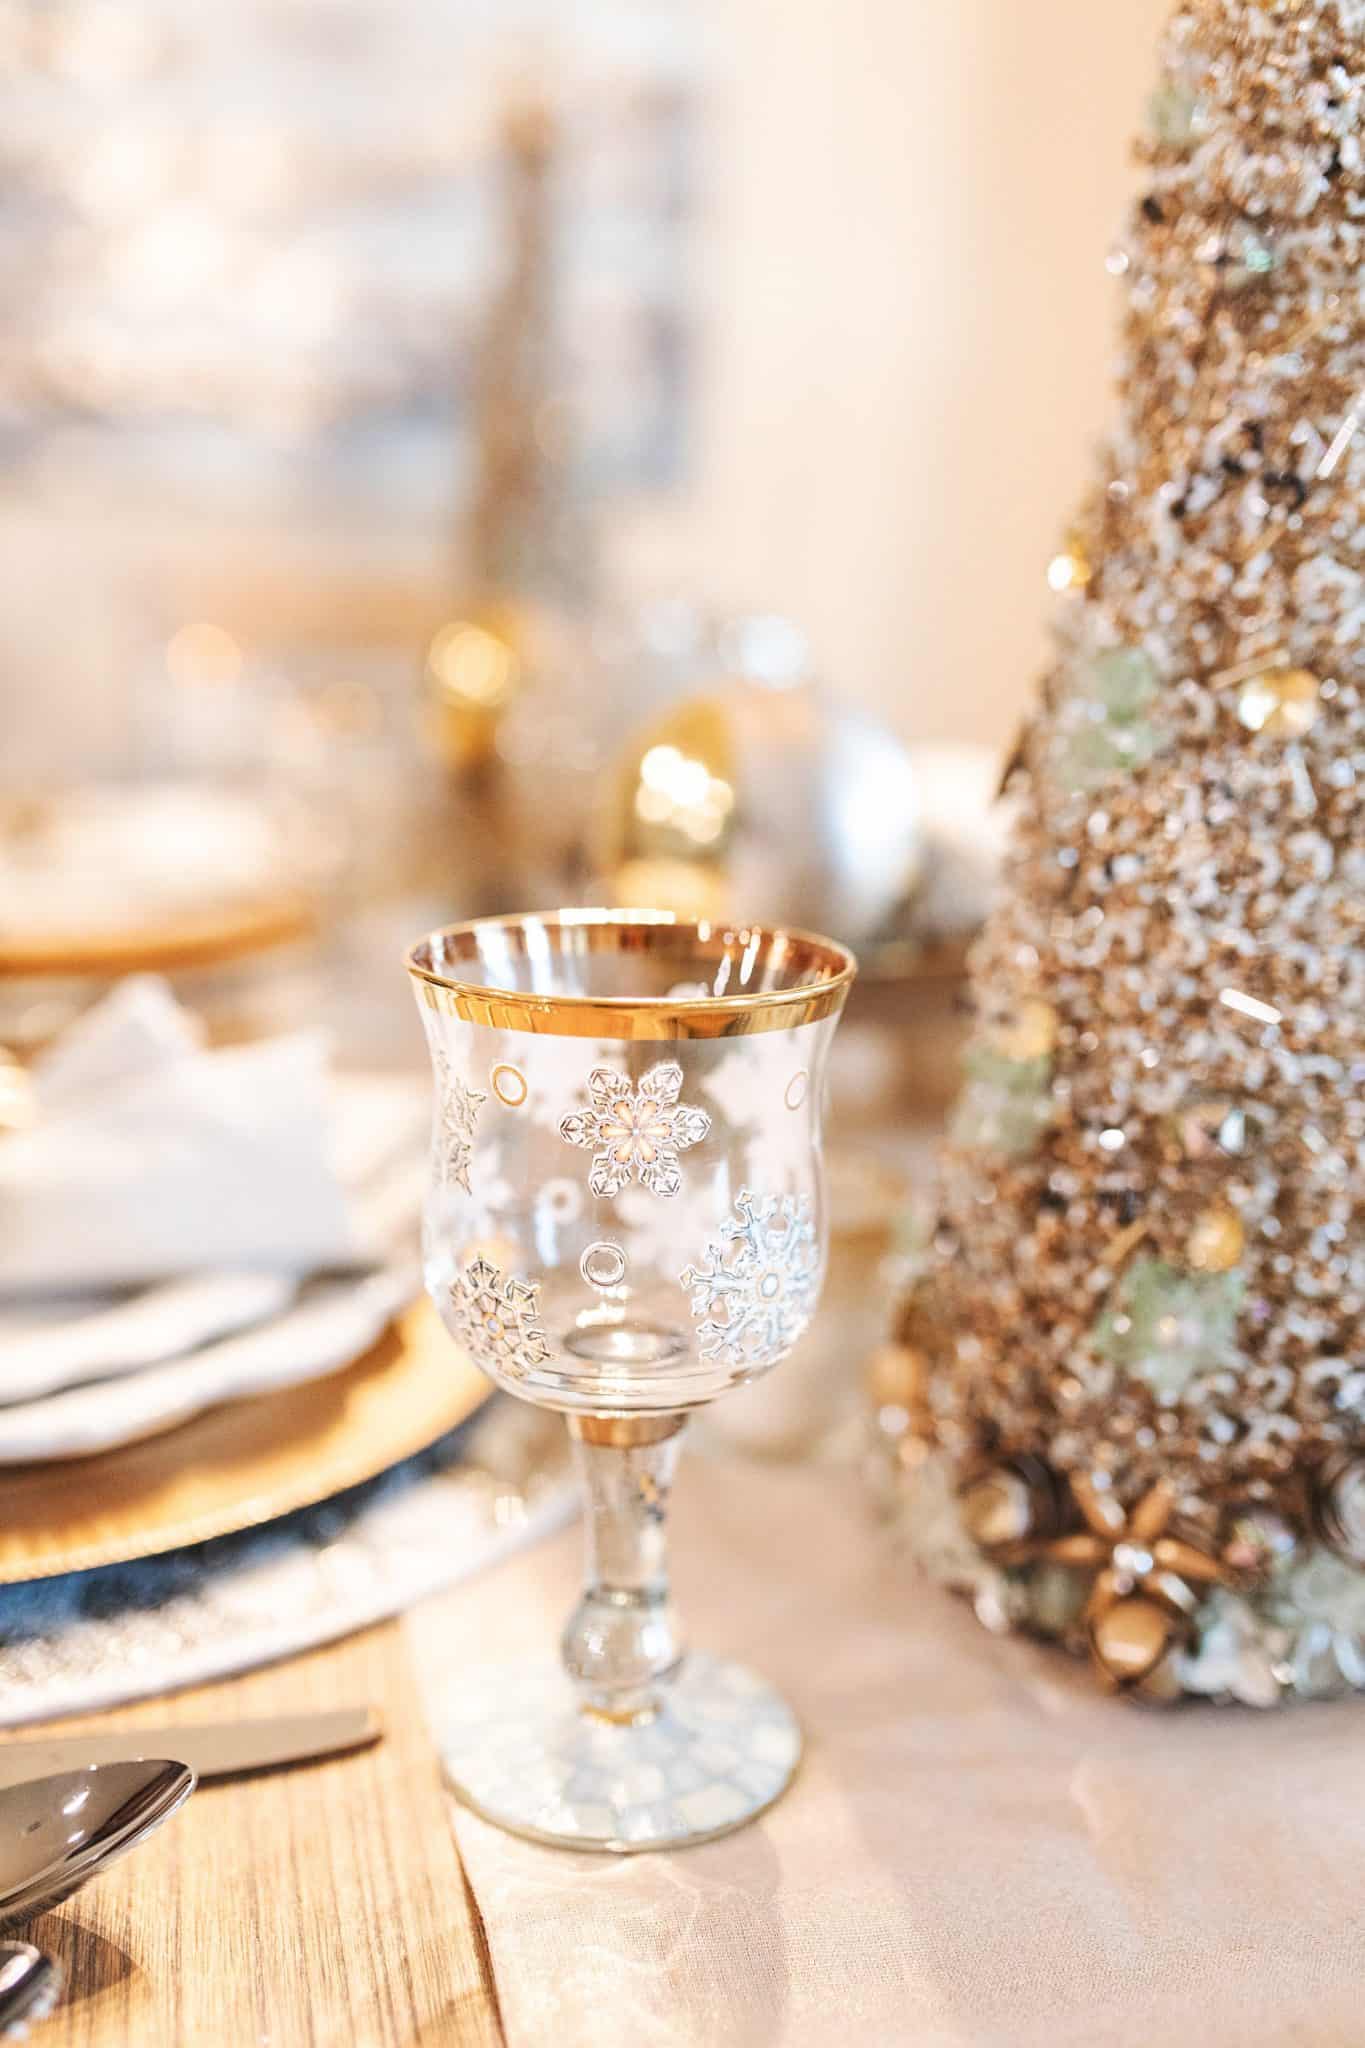 MacKenzie Childs Table Setting Ideas by popular Texas life and style blog, Glamorous Versatility: image of a table set with MacKenzie Childs Sweetbriar collection items.